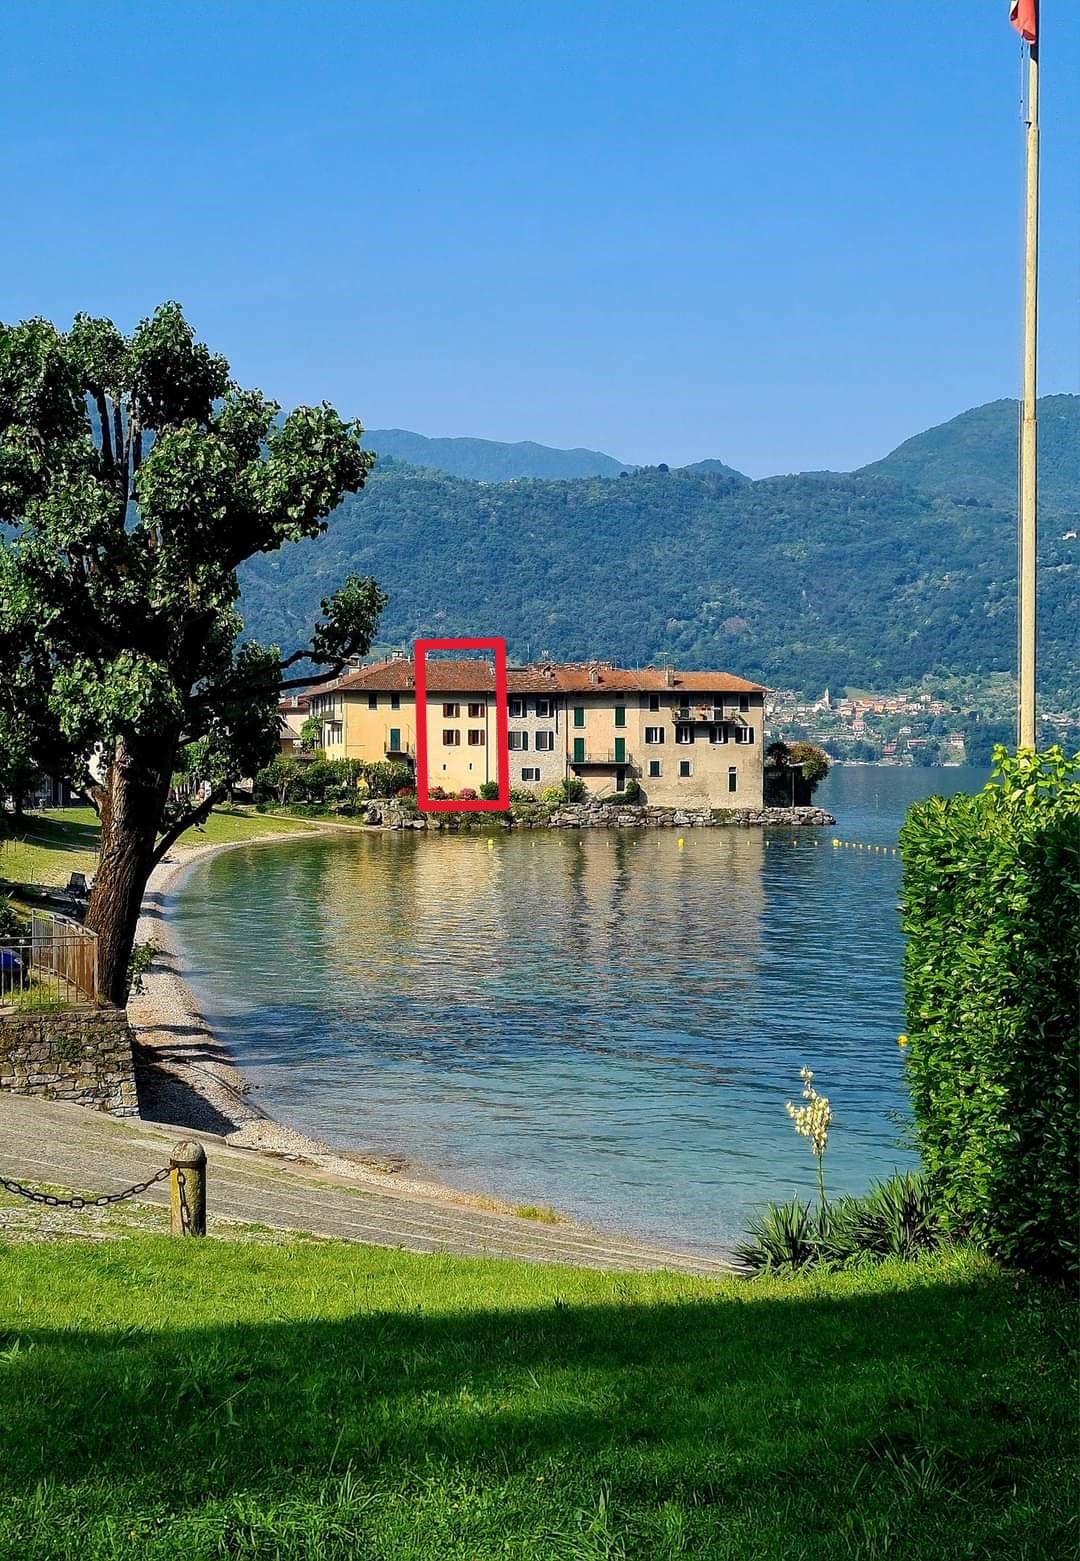 Riva Bianca Castle Holiday Home